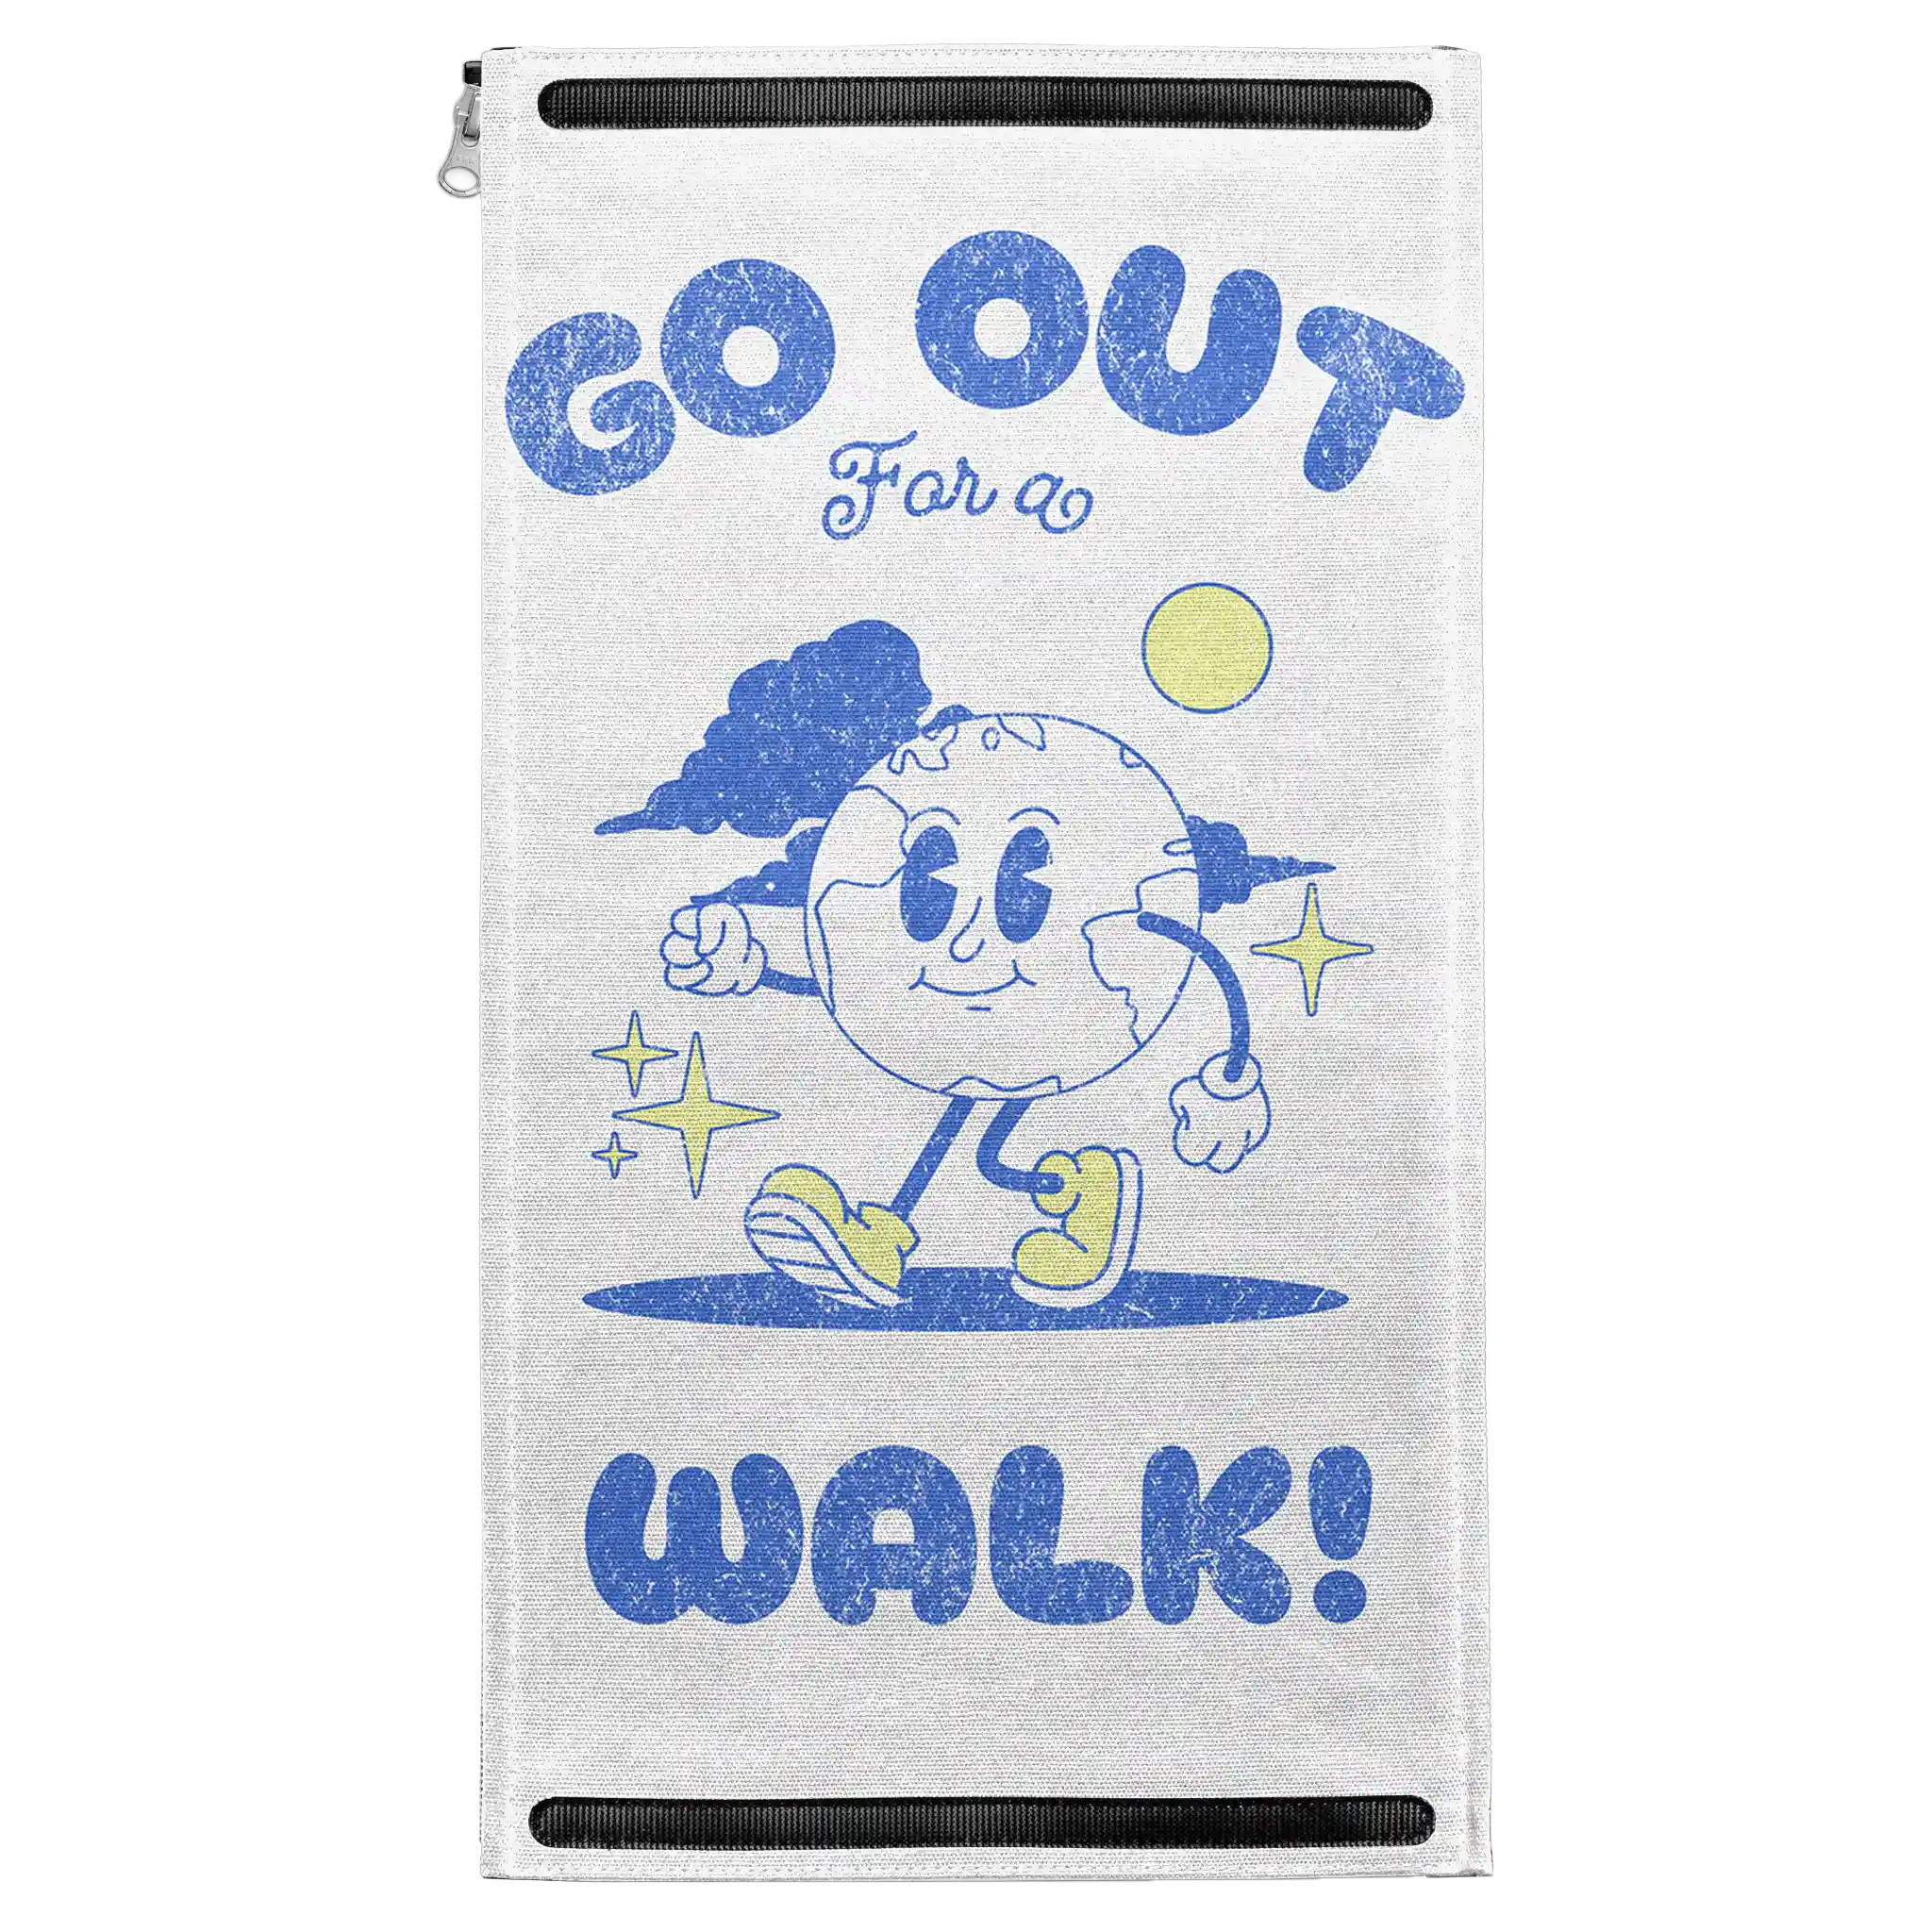 Go Out Patch